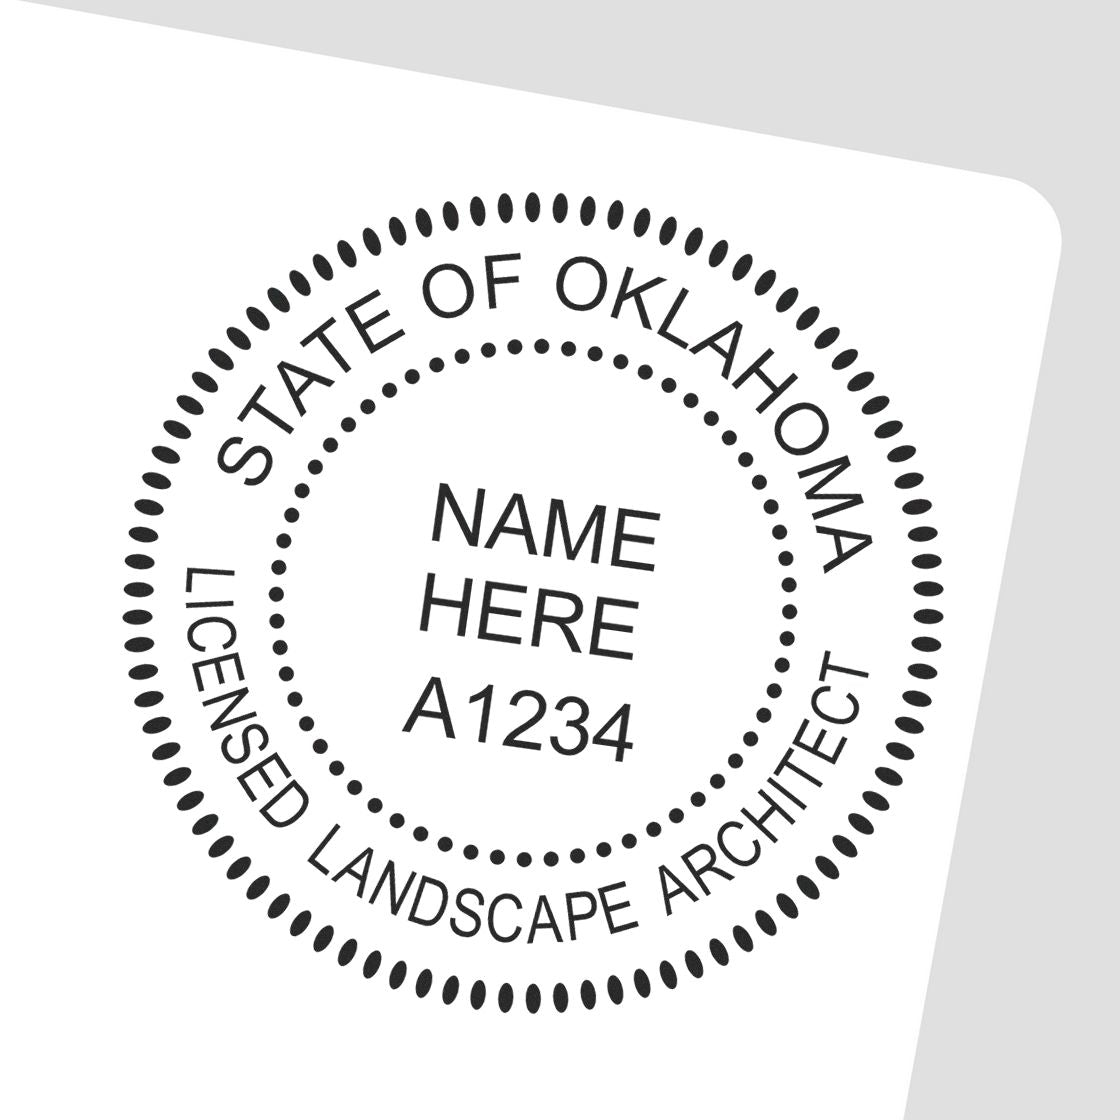 This paper is stamped with a sample imprint of the Premium MaxLight Pre-Inked Oklahoma Landscape Architectural Stamp, signifying its quality and reliability.